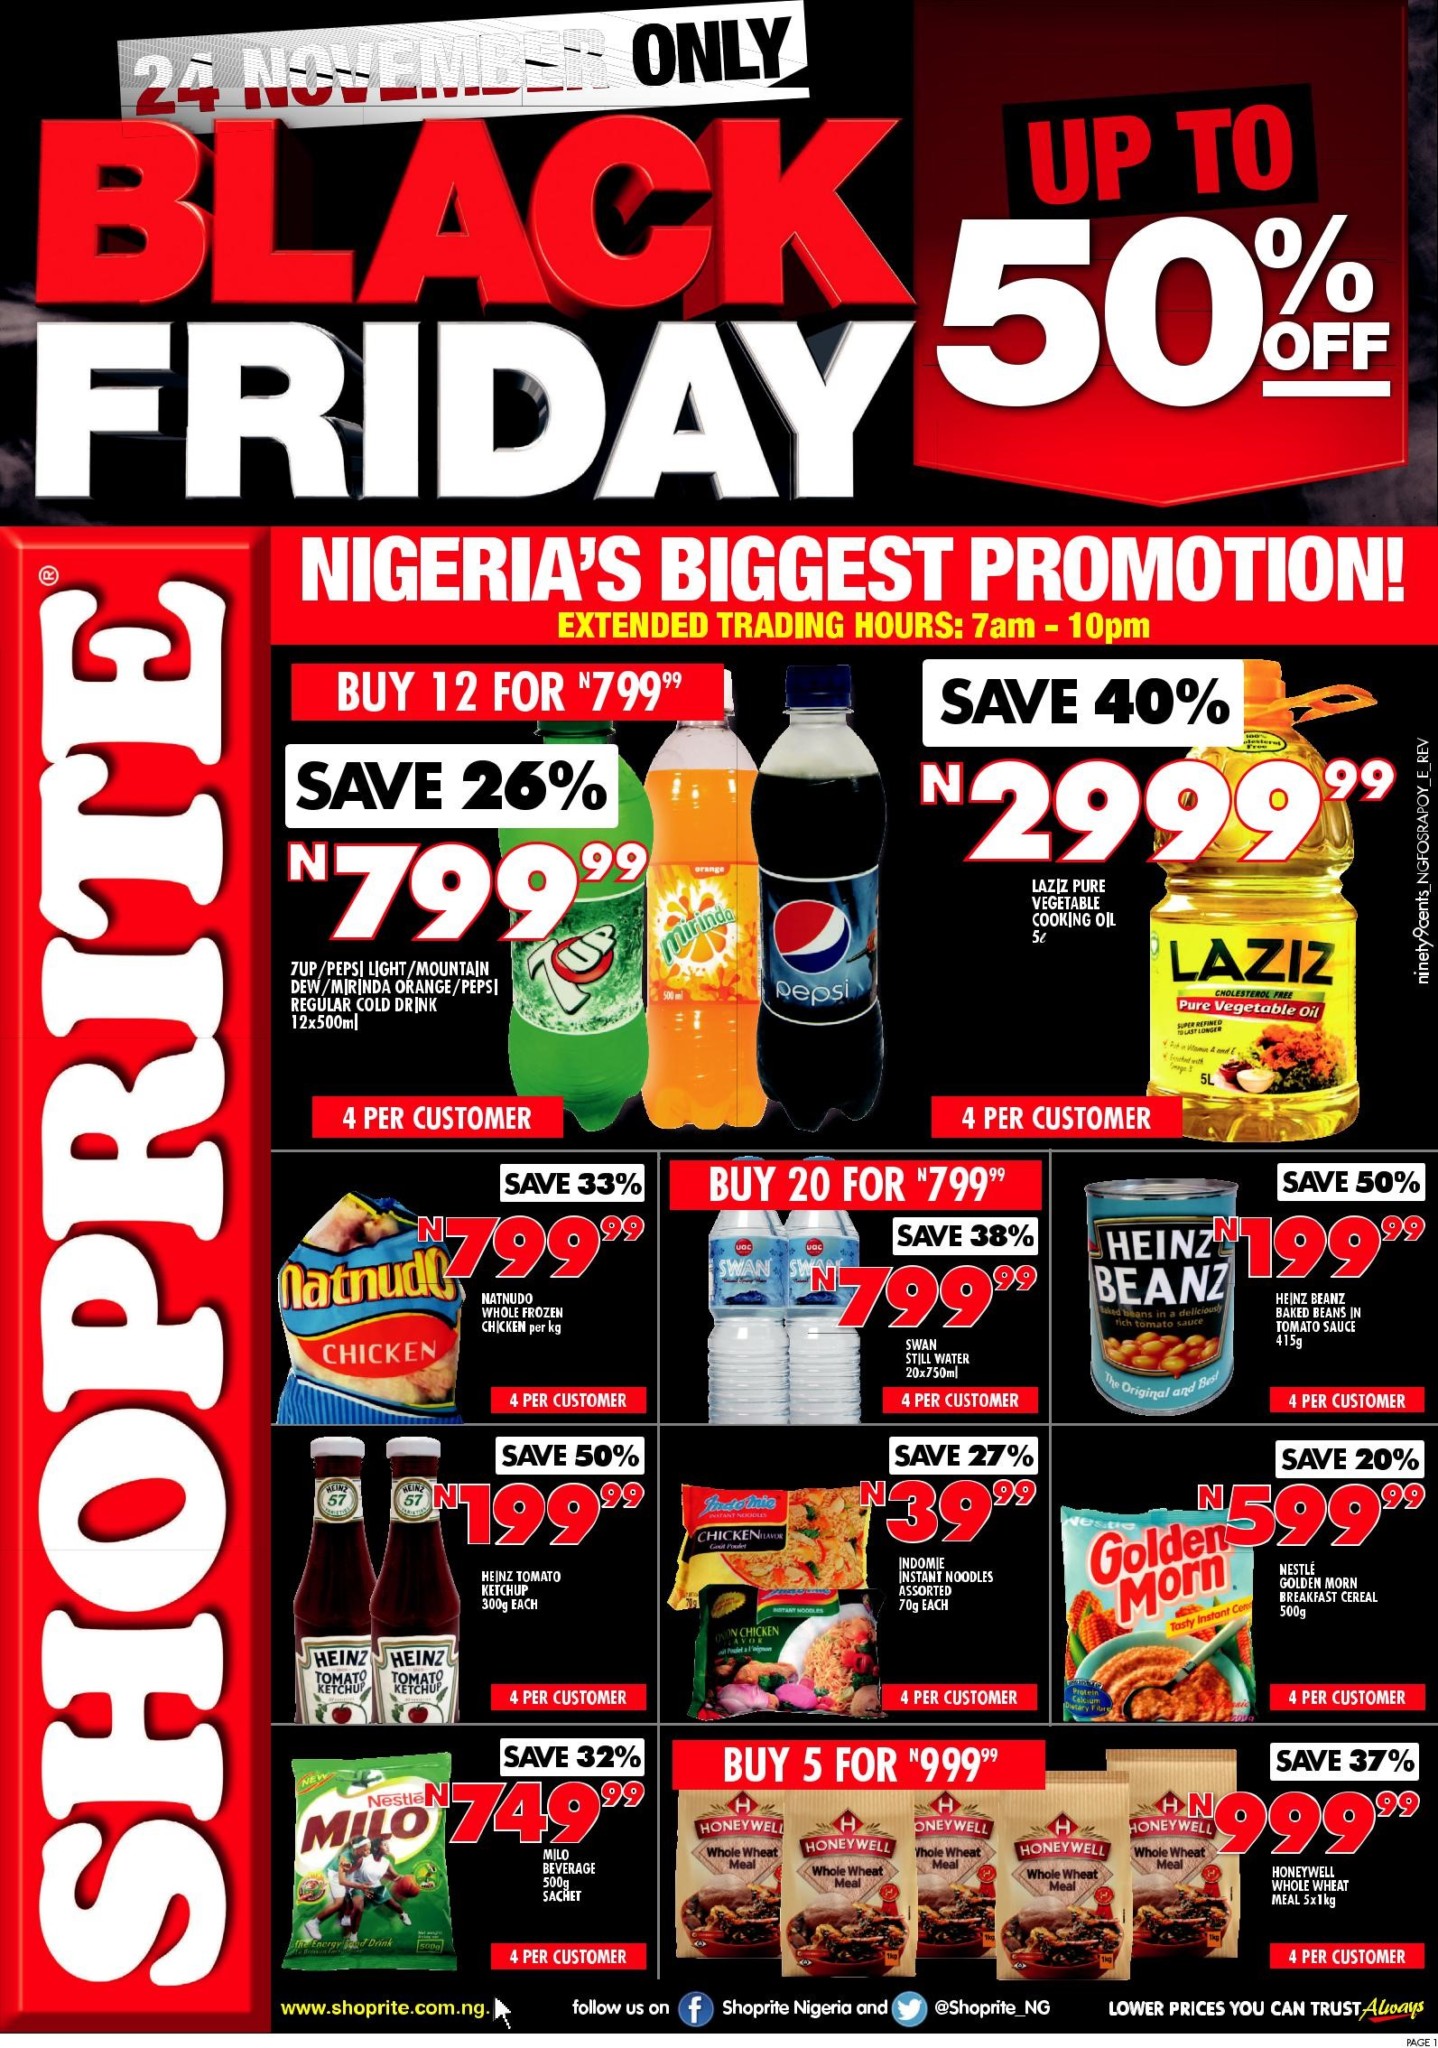 SHOPRITE this Black Friday! Get up to 50% Discount on Amazing Deals - Who Has Black Friday Catering Deals